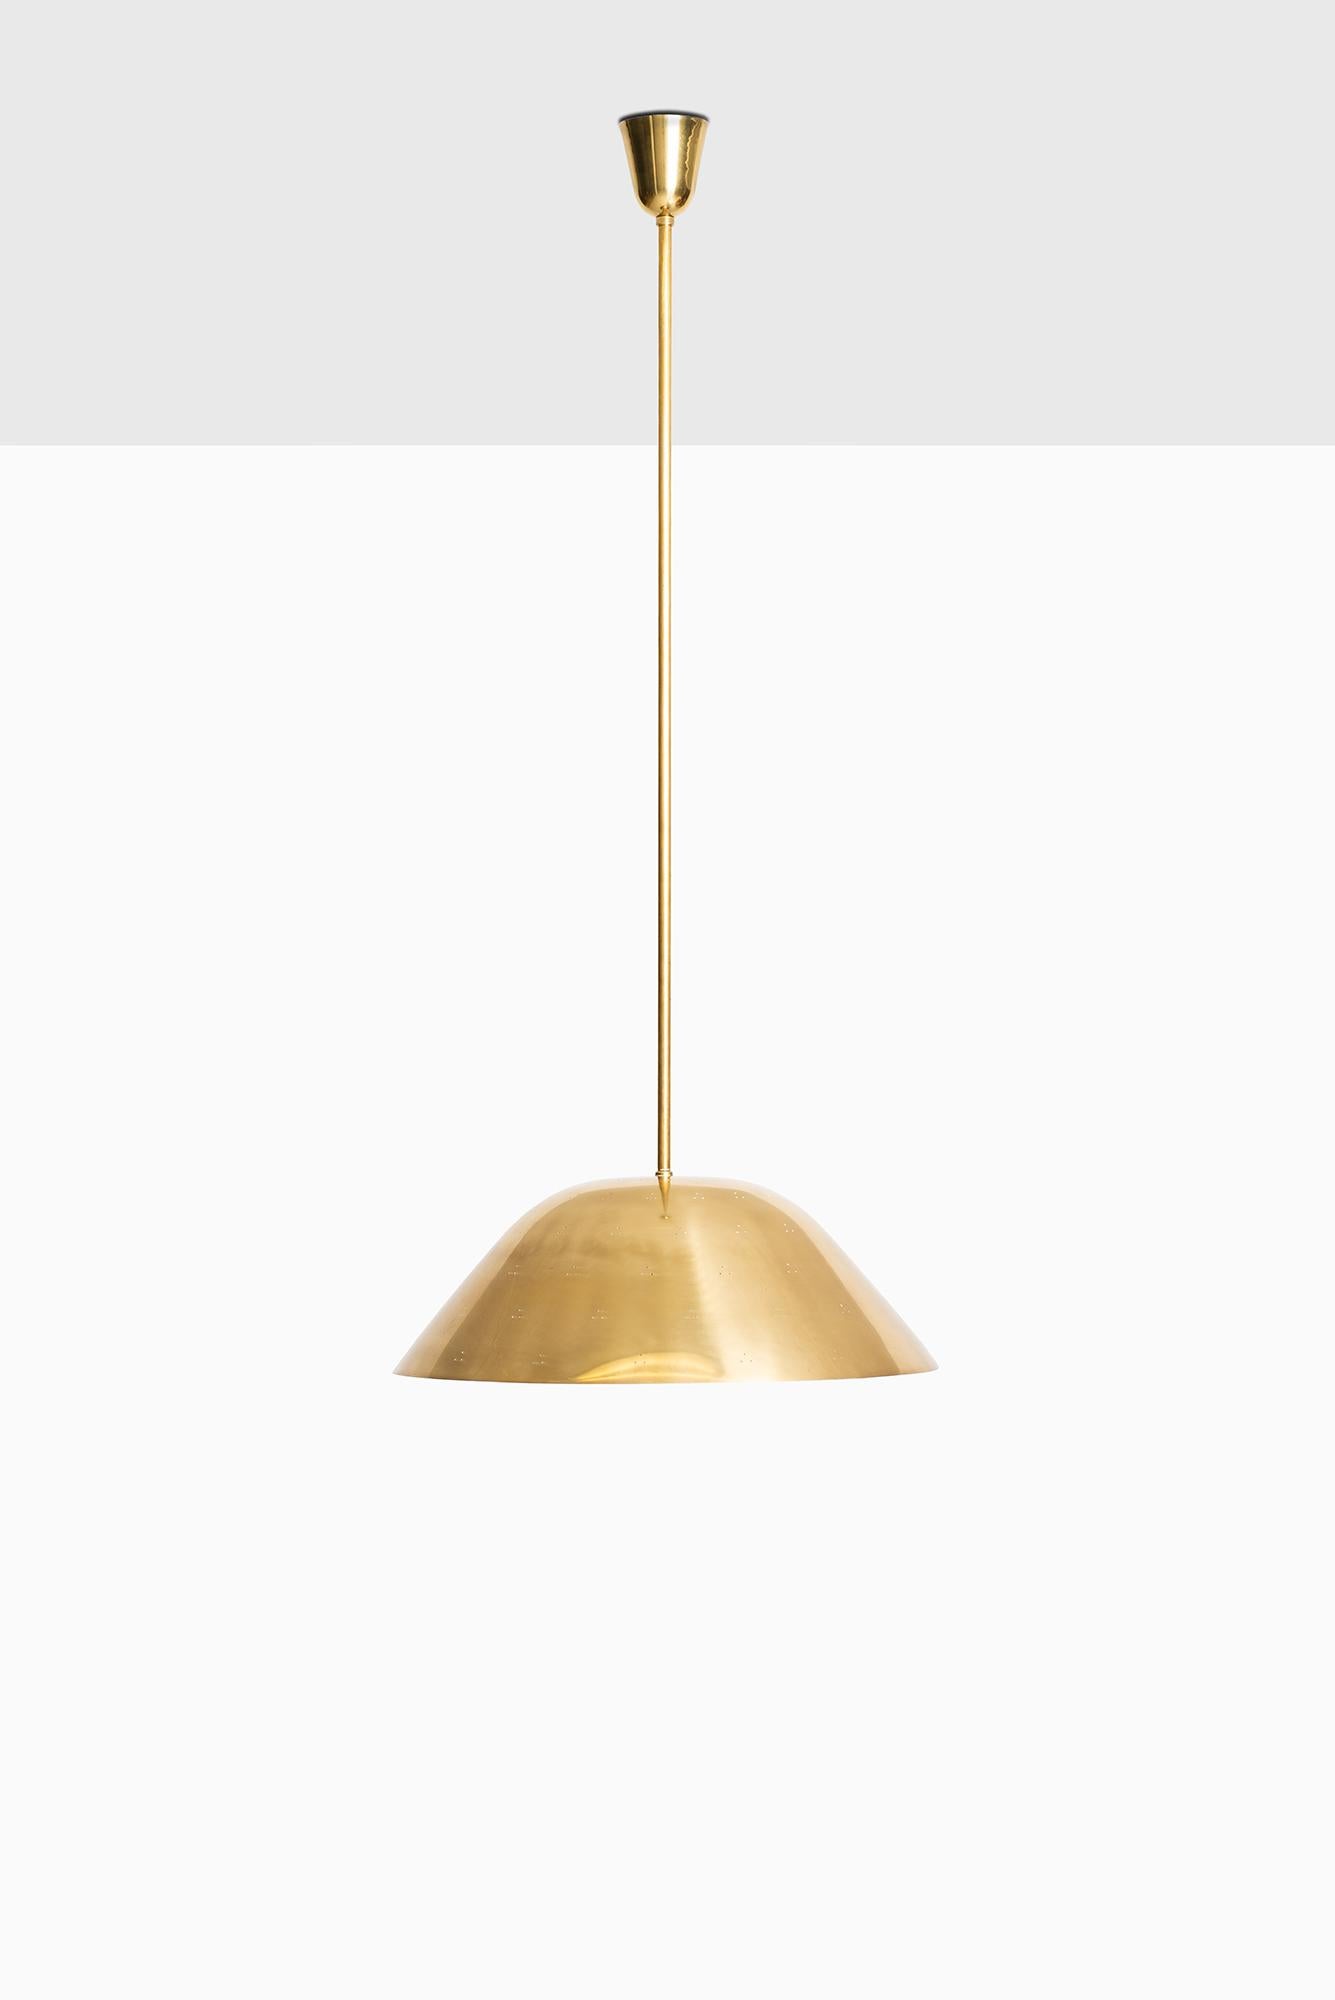 Very rare ceiling lamp designed by Paavo Tynell. Produced by Taito in Finland.